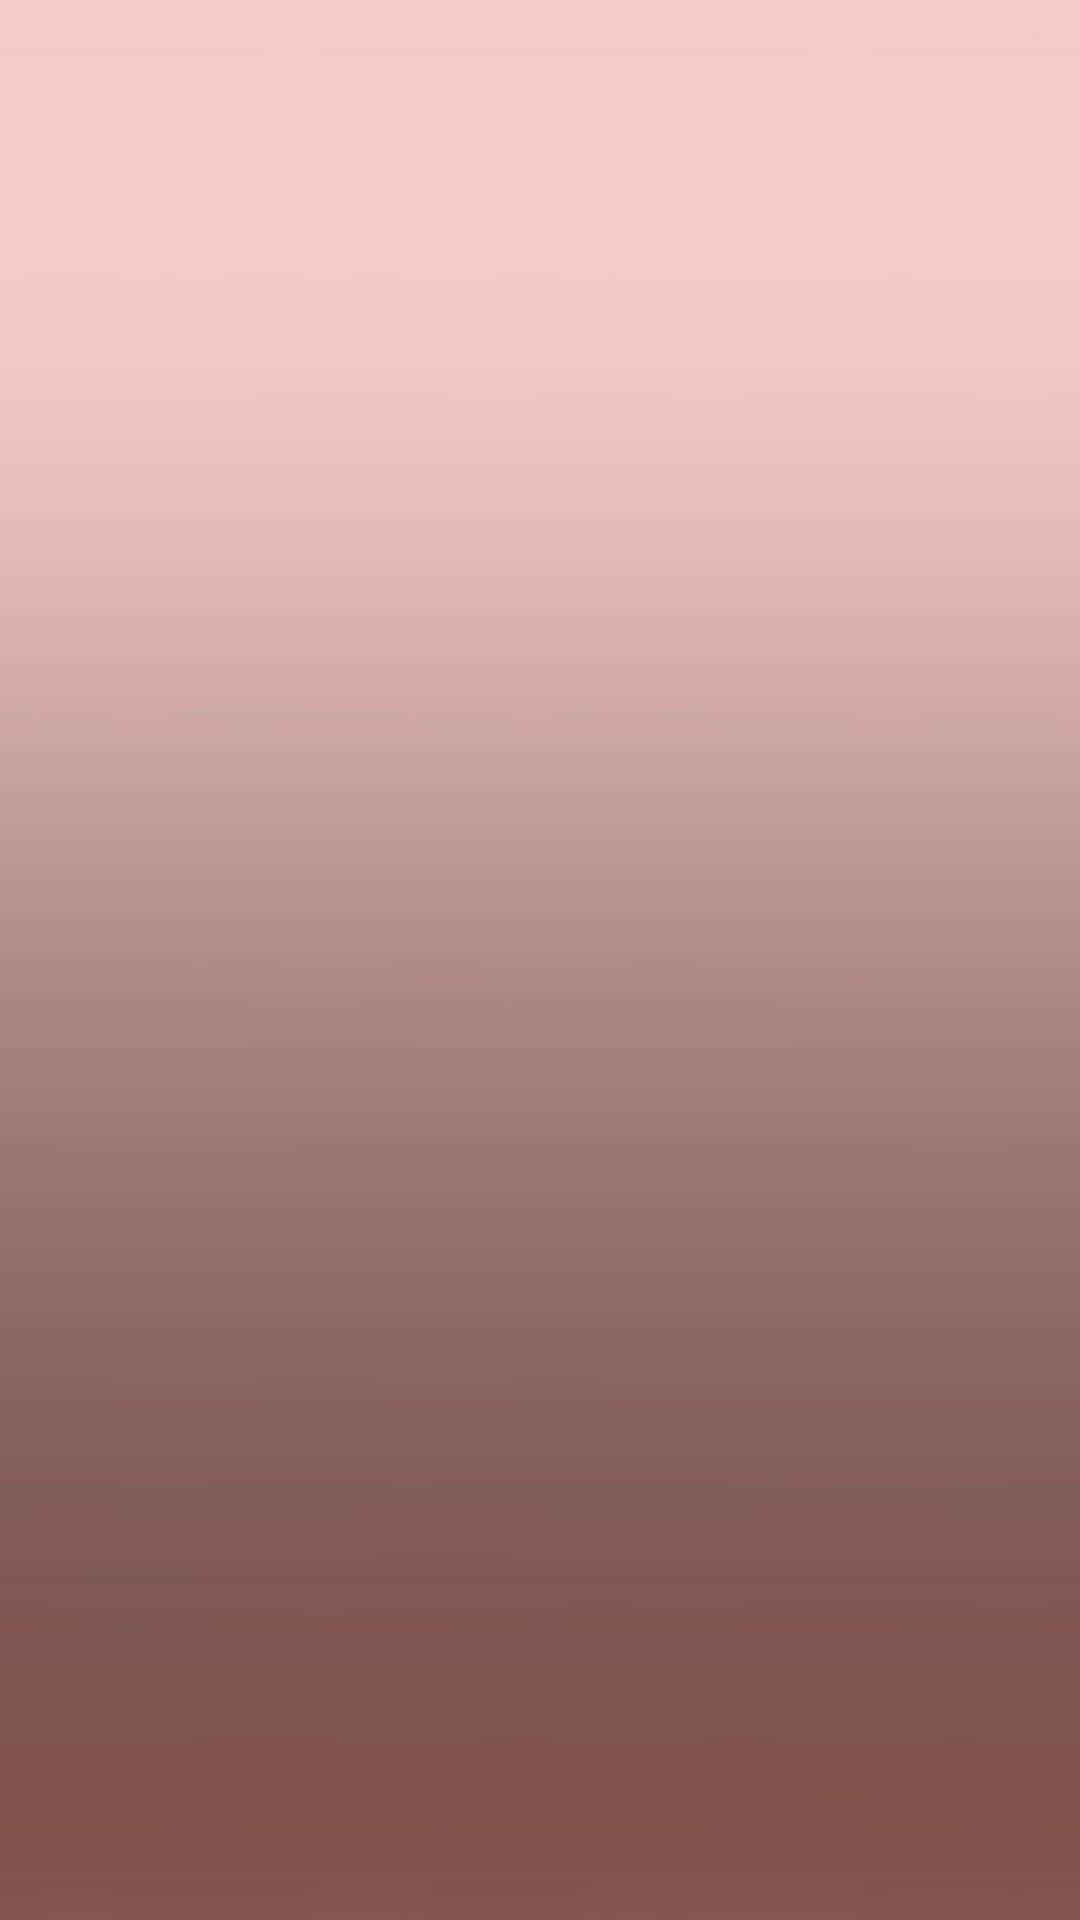 Download Solid Gradient Rose Gold Iphone Wallpaper 